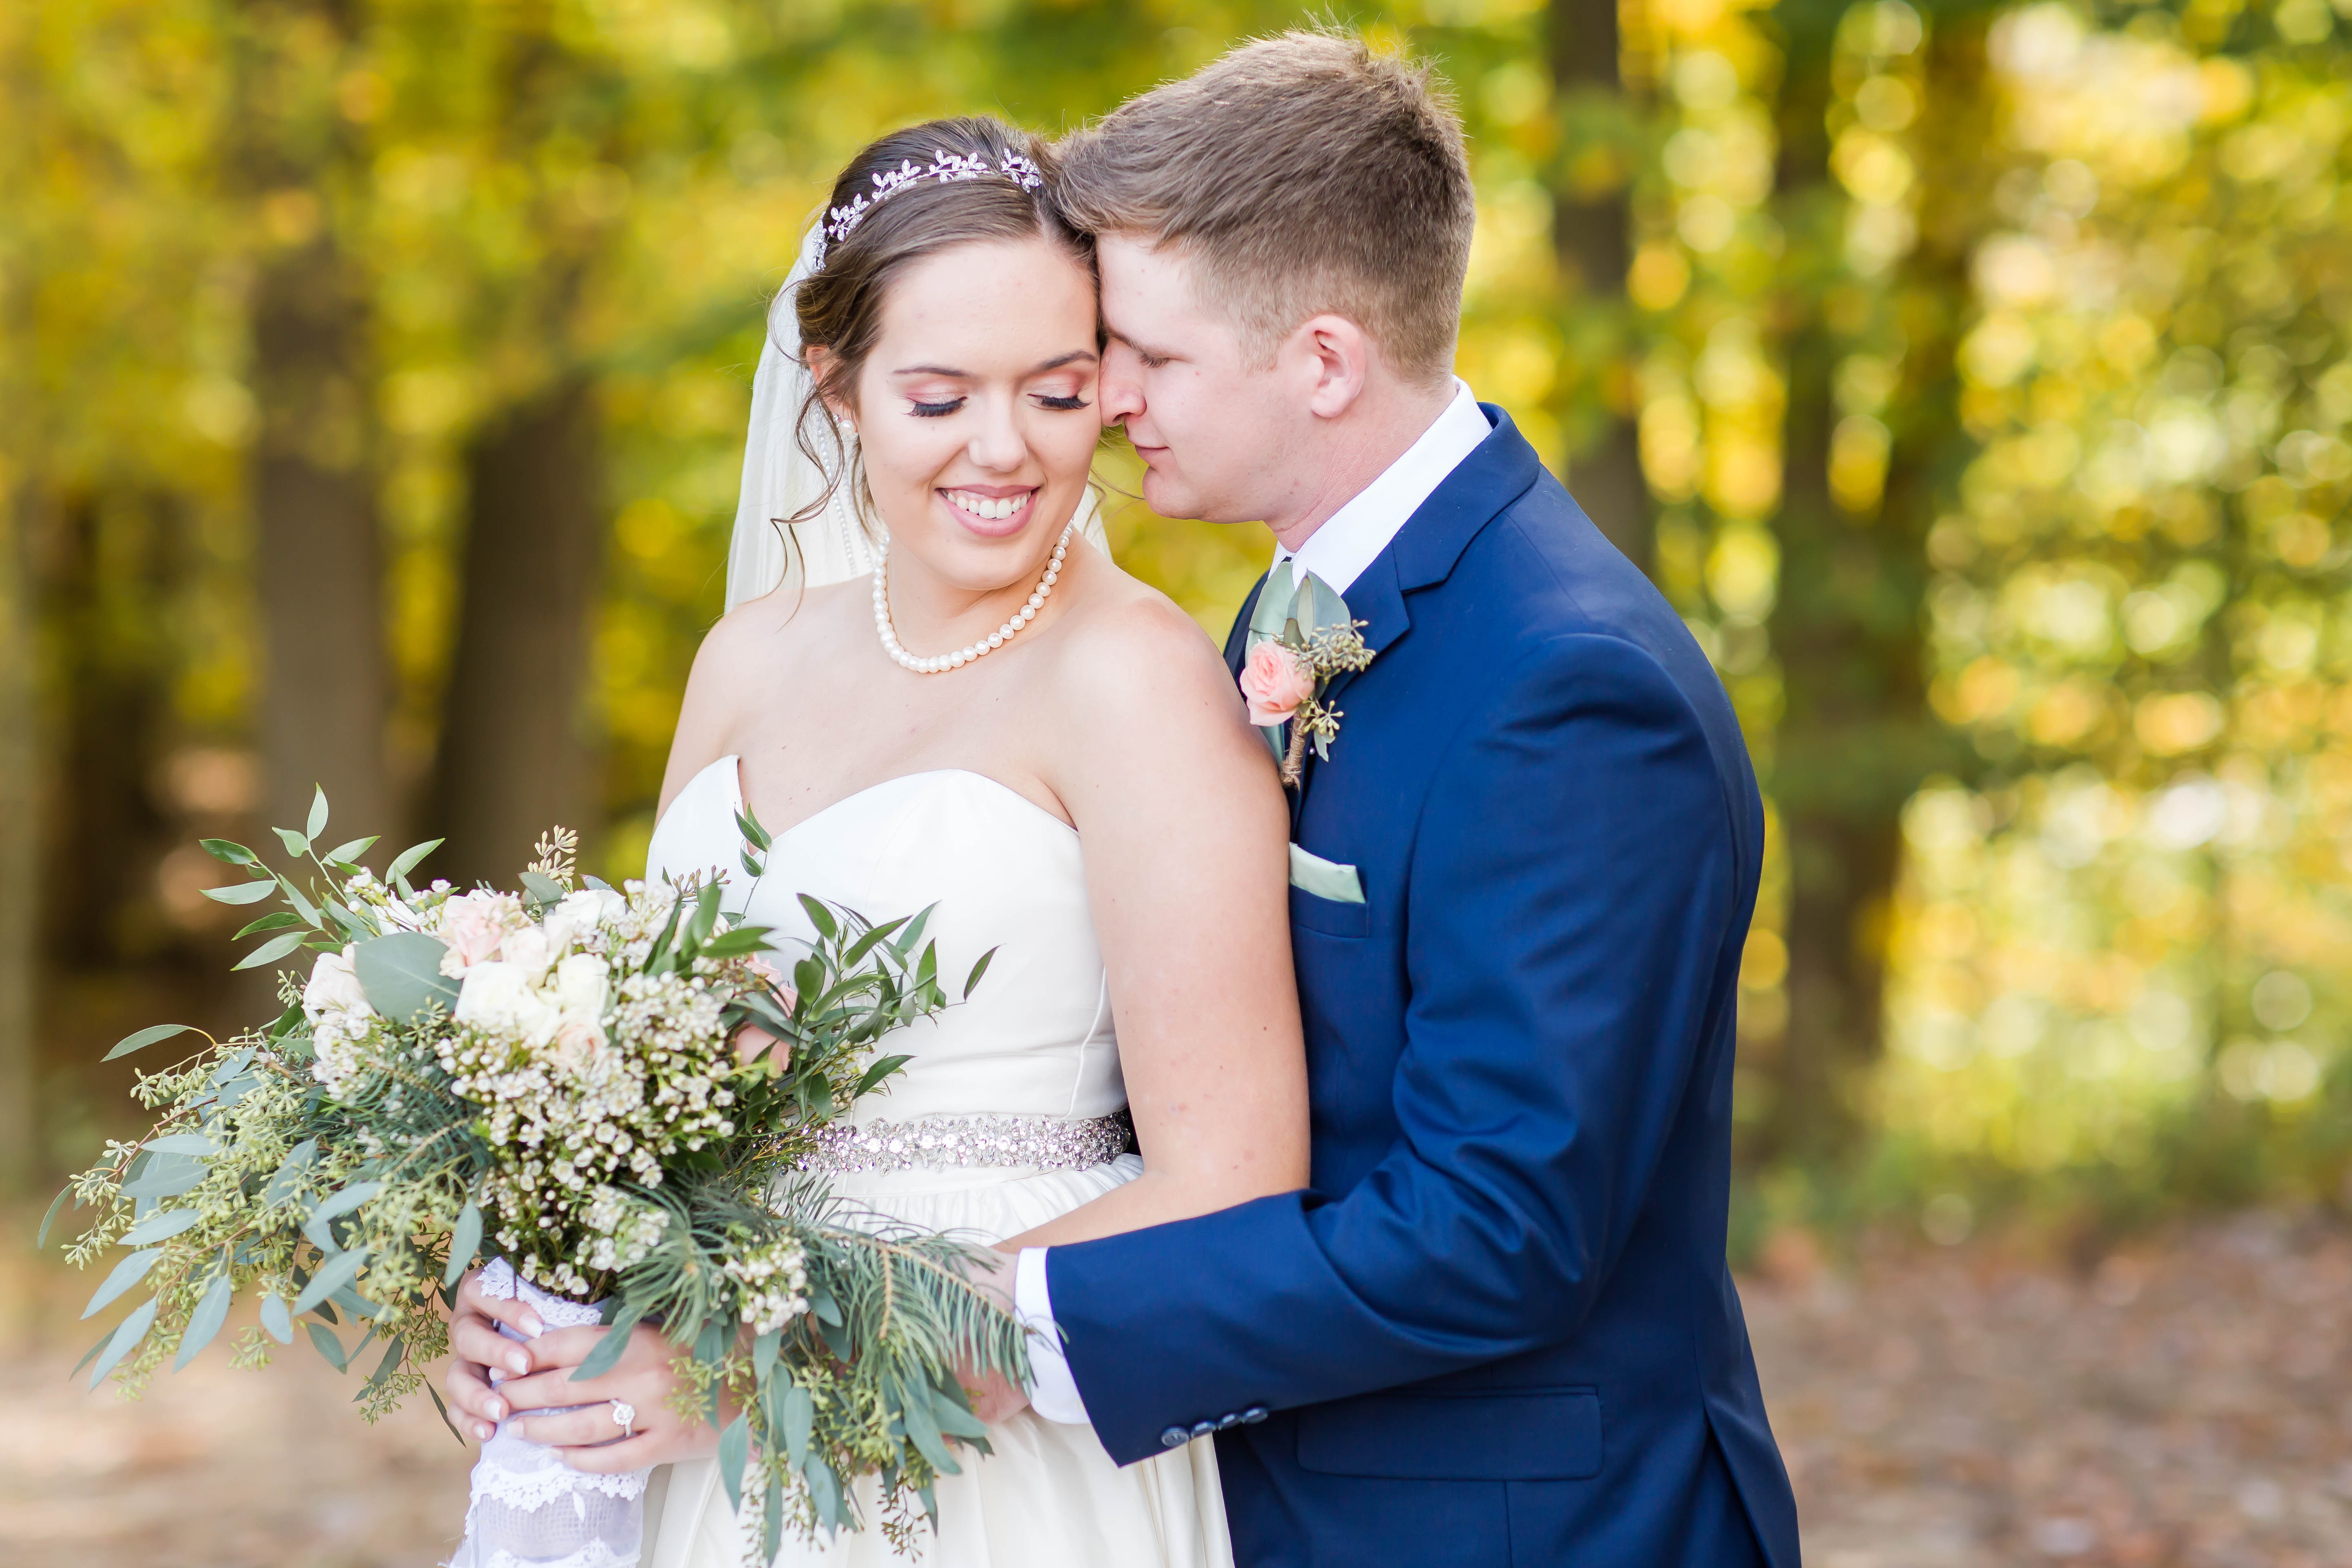 Bride and groom at willow haven farm in wooster ohio on fall wedding day in October photographed by akron ohio wedding photographer